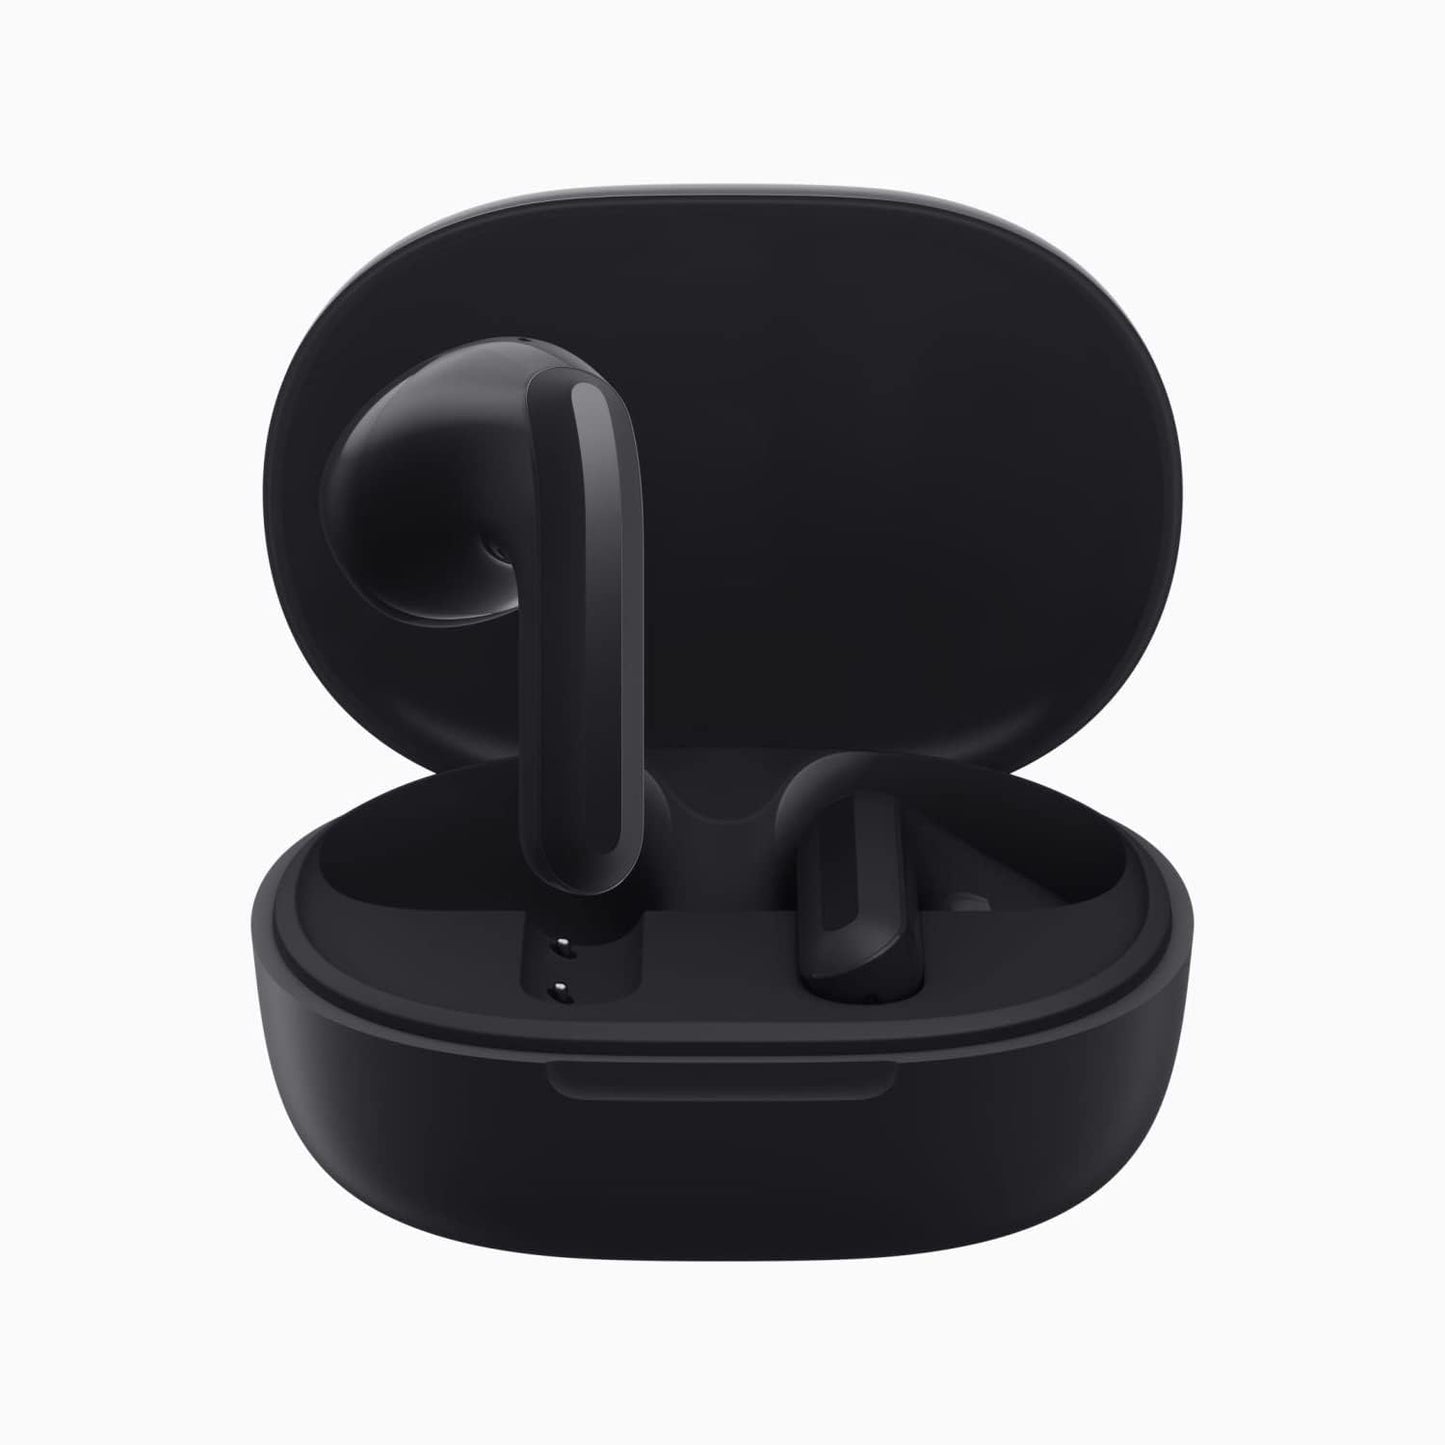 Xiaomi Redmi Buds 4 Lite TWS Wireless Earbuds, Bluetooth 5.3 Low-Latency Game Headset with AI Call Noise Cancelling, IP54 Waterproof, 20H Playtime, Lightweight Comfort Fit Headphones, Black